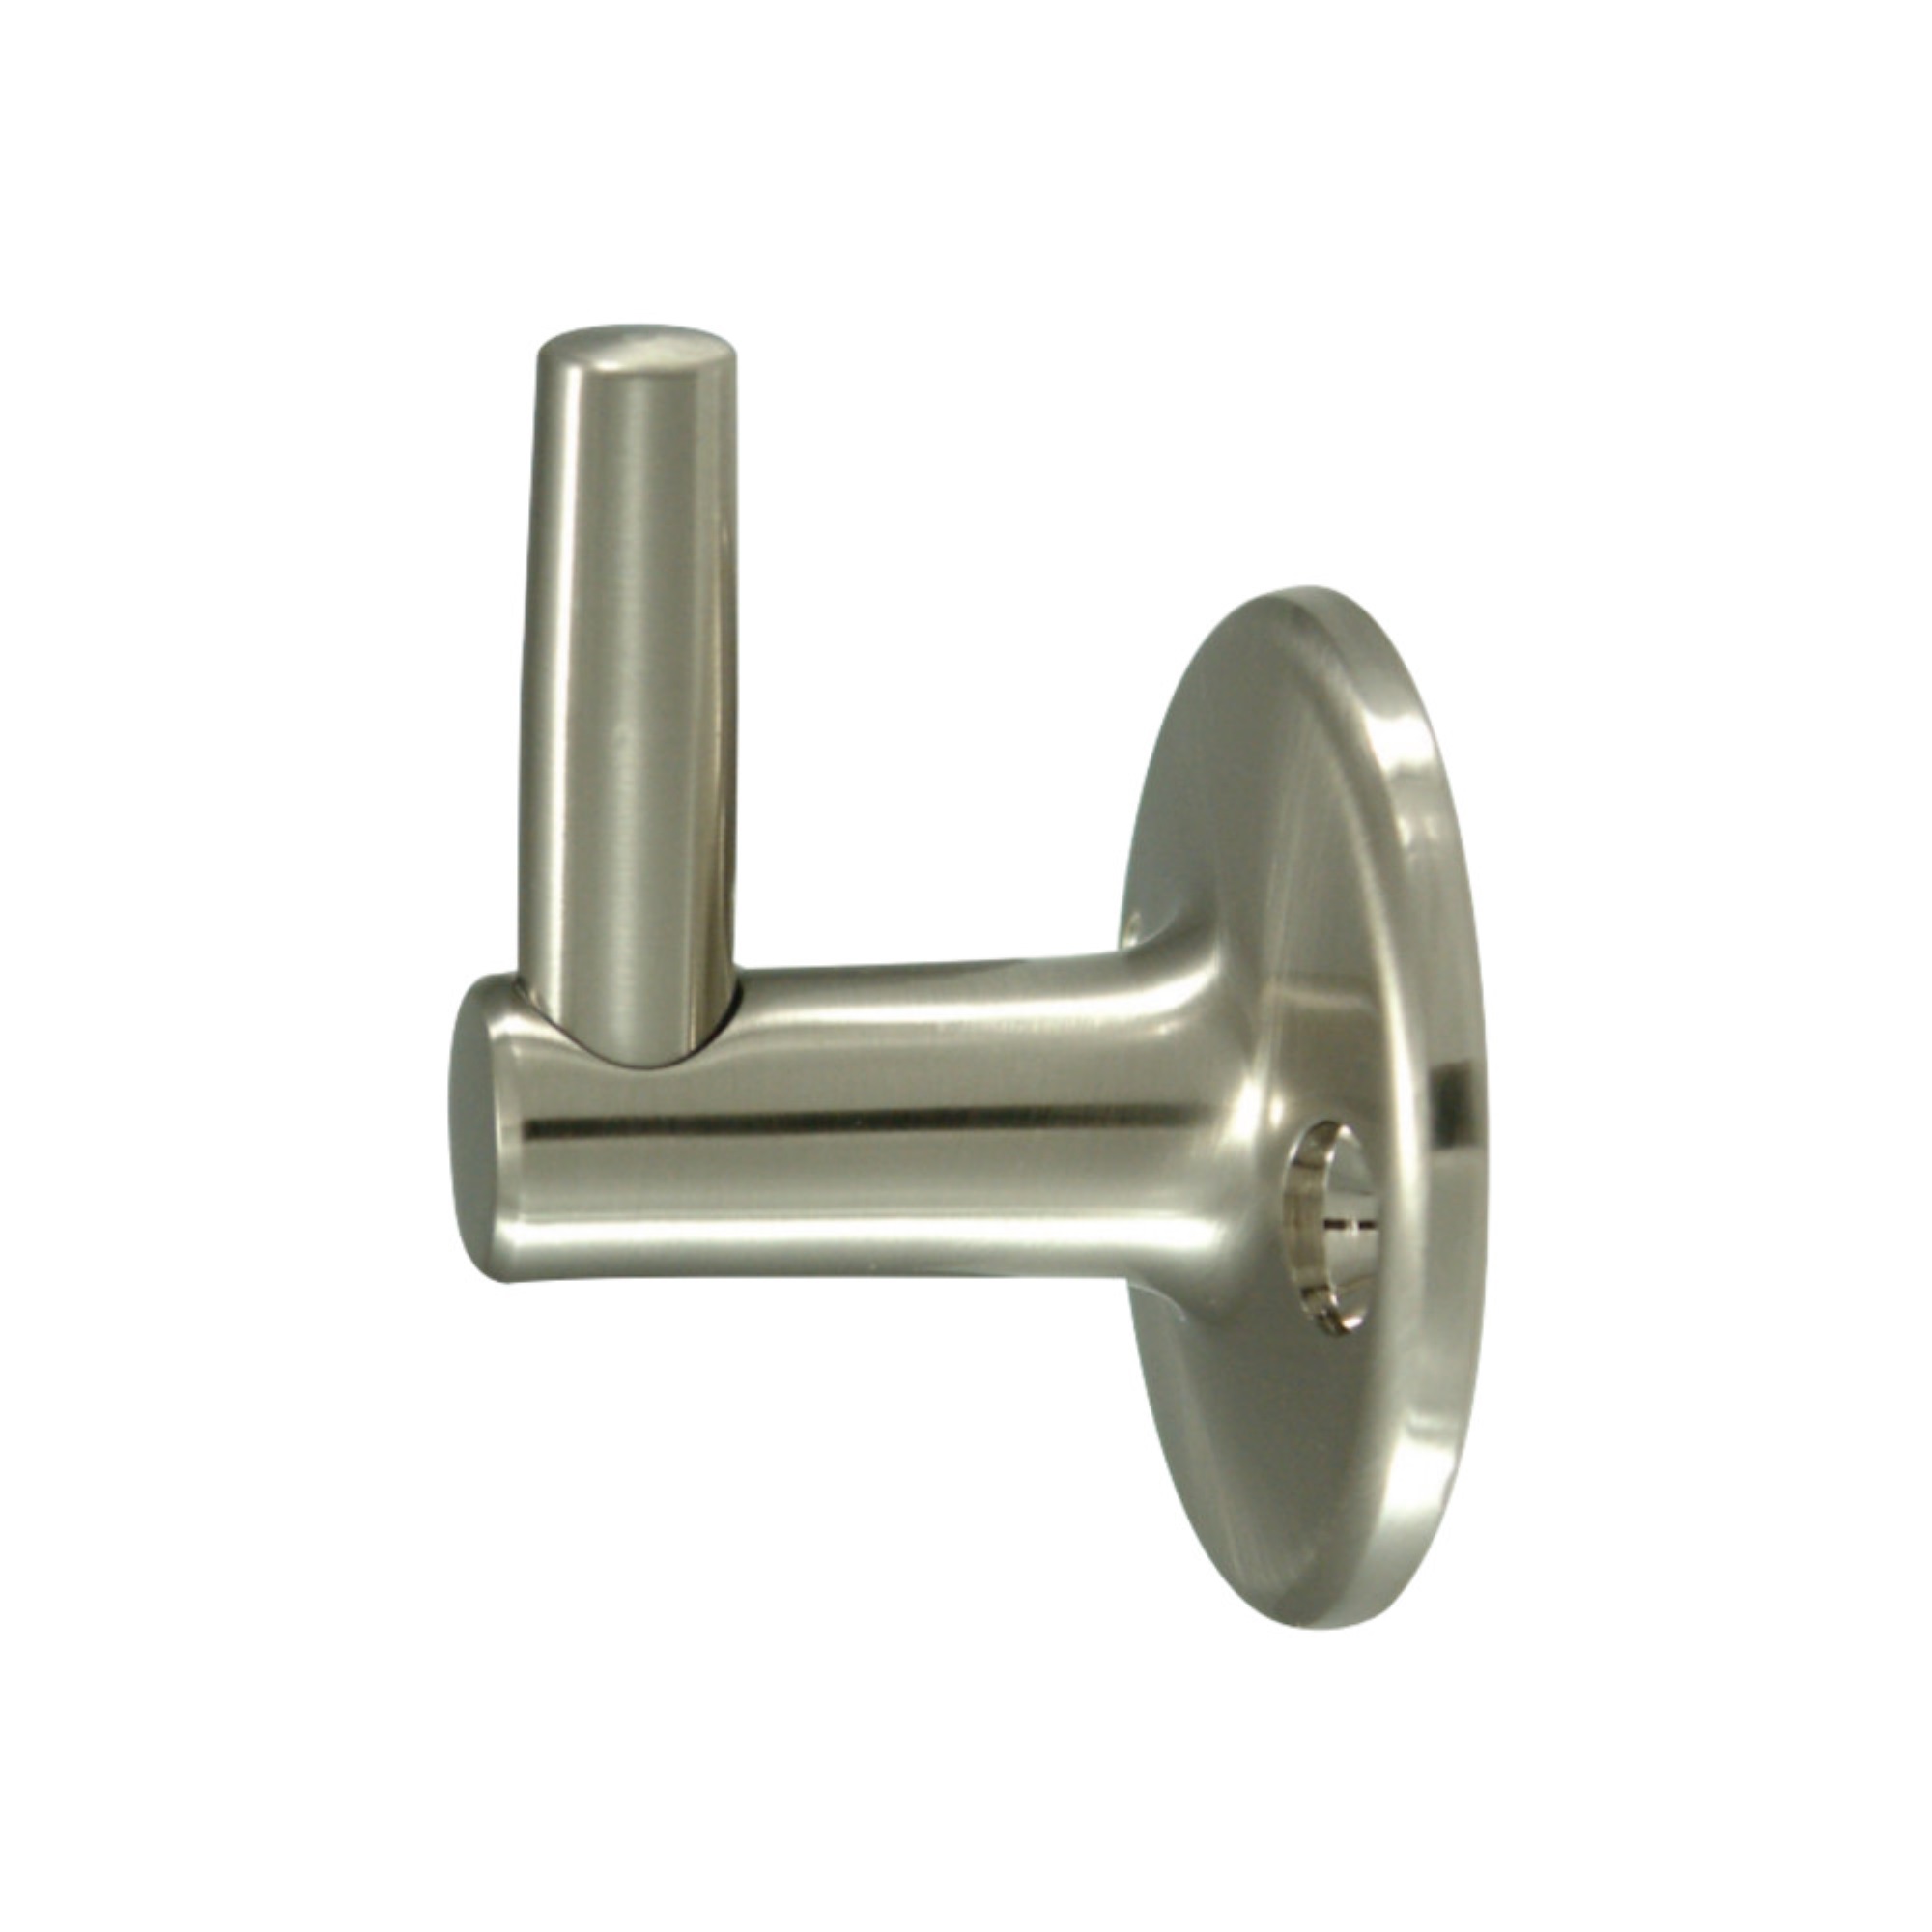 Kingston Brass K171A8 Pin Wall Mount for Shower Connector, Brushed Nickel